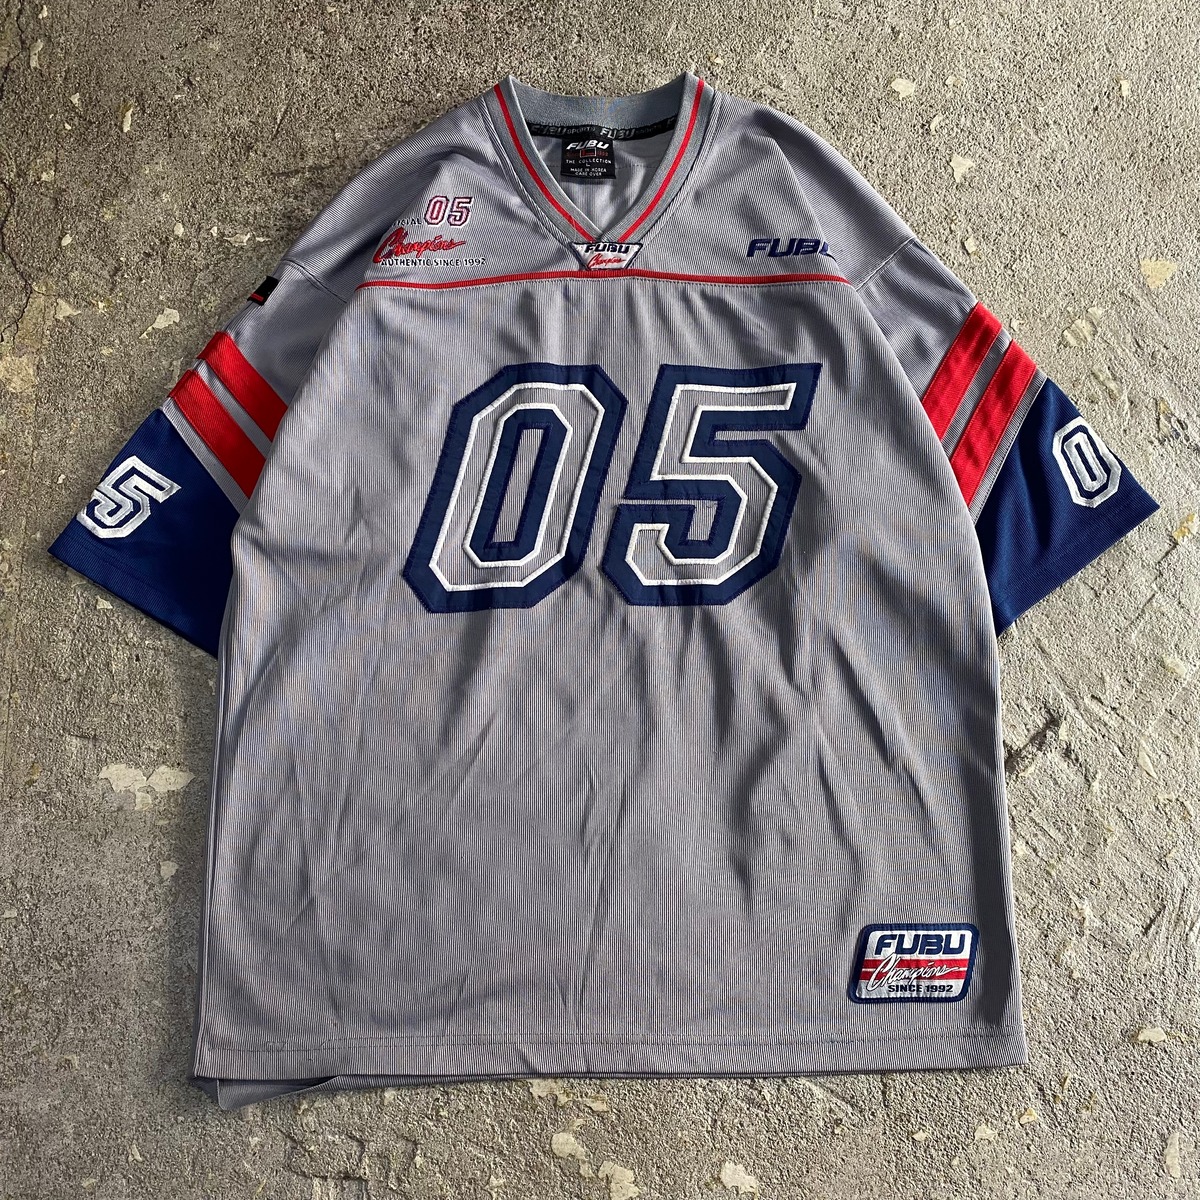 90s〜 FUBU game shirt | What'z up